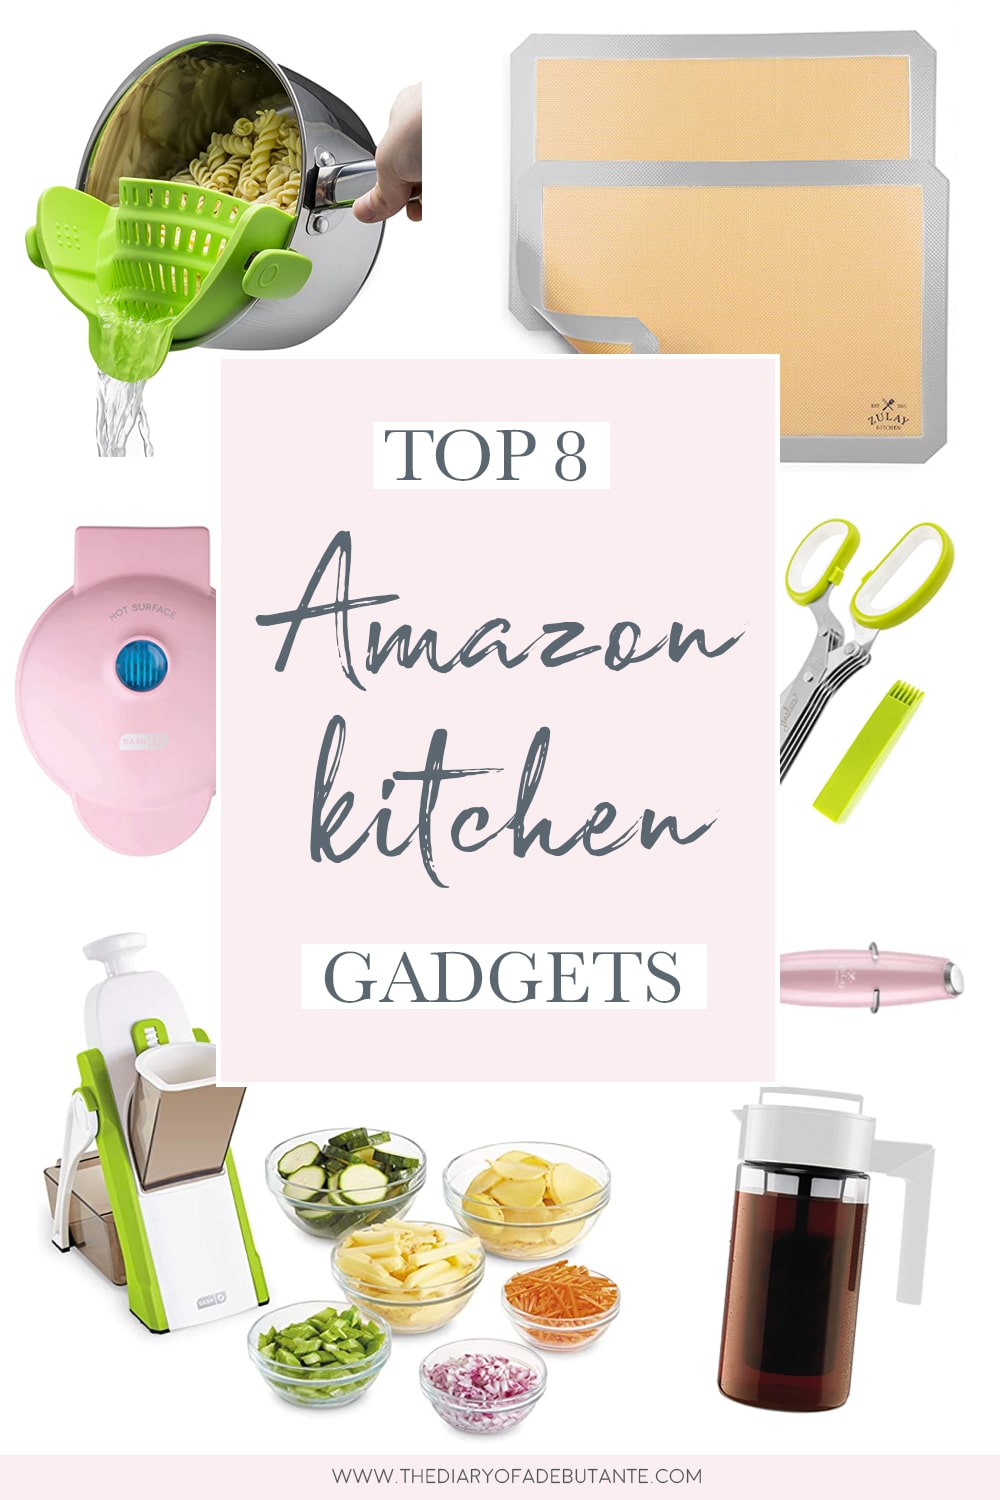 Blogger Stephanie Ziajka rounds up 8 of the best Amazon kitchen gadgets on Diary of a Debutante